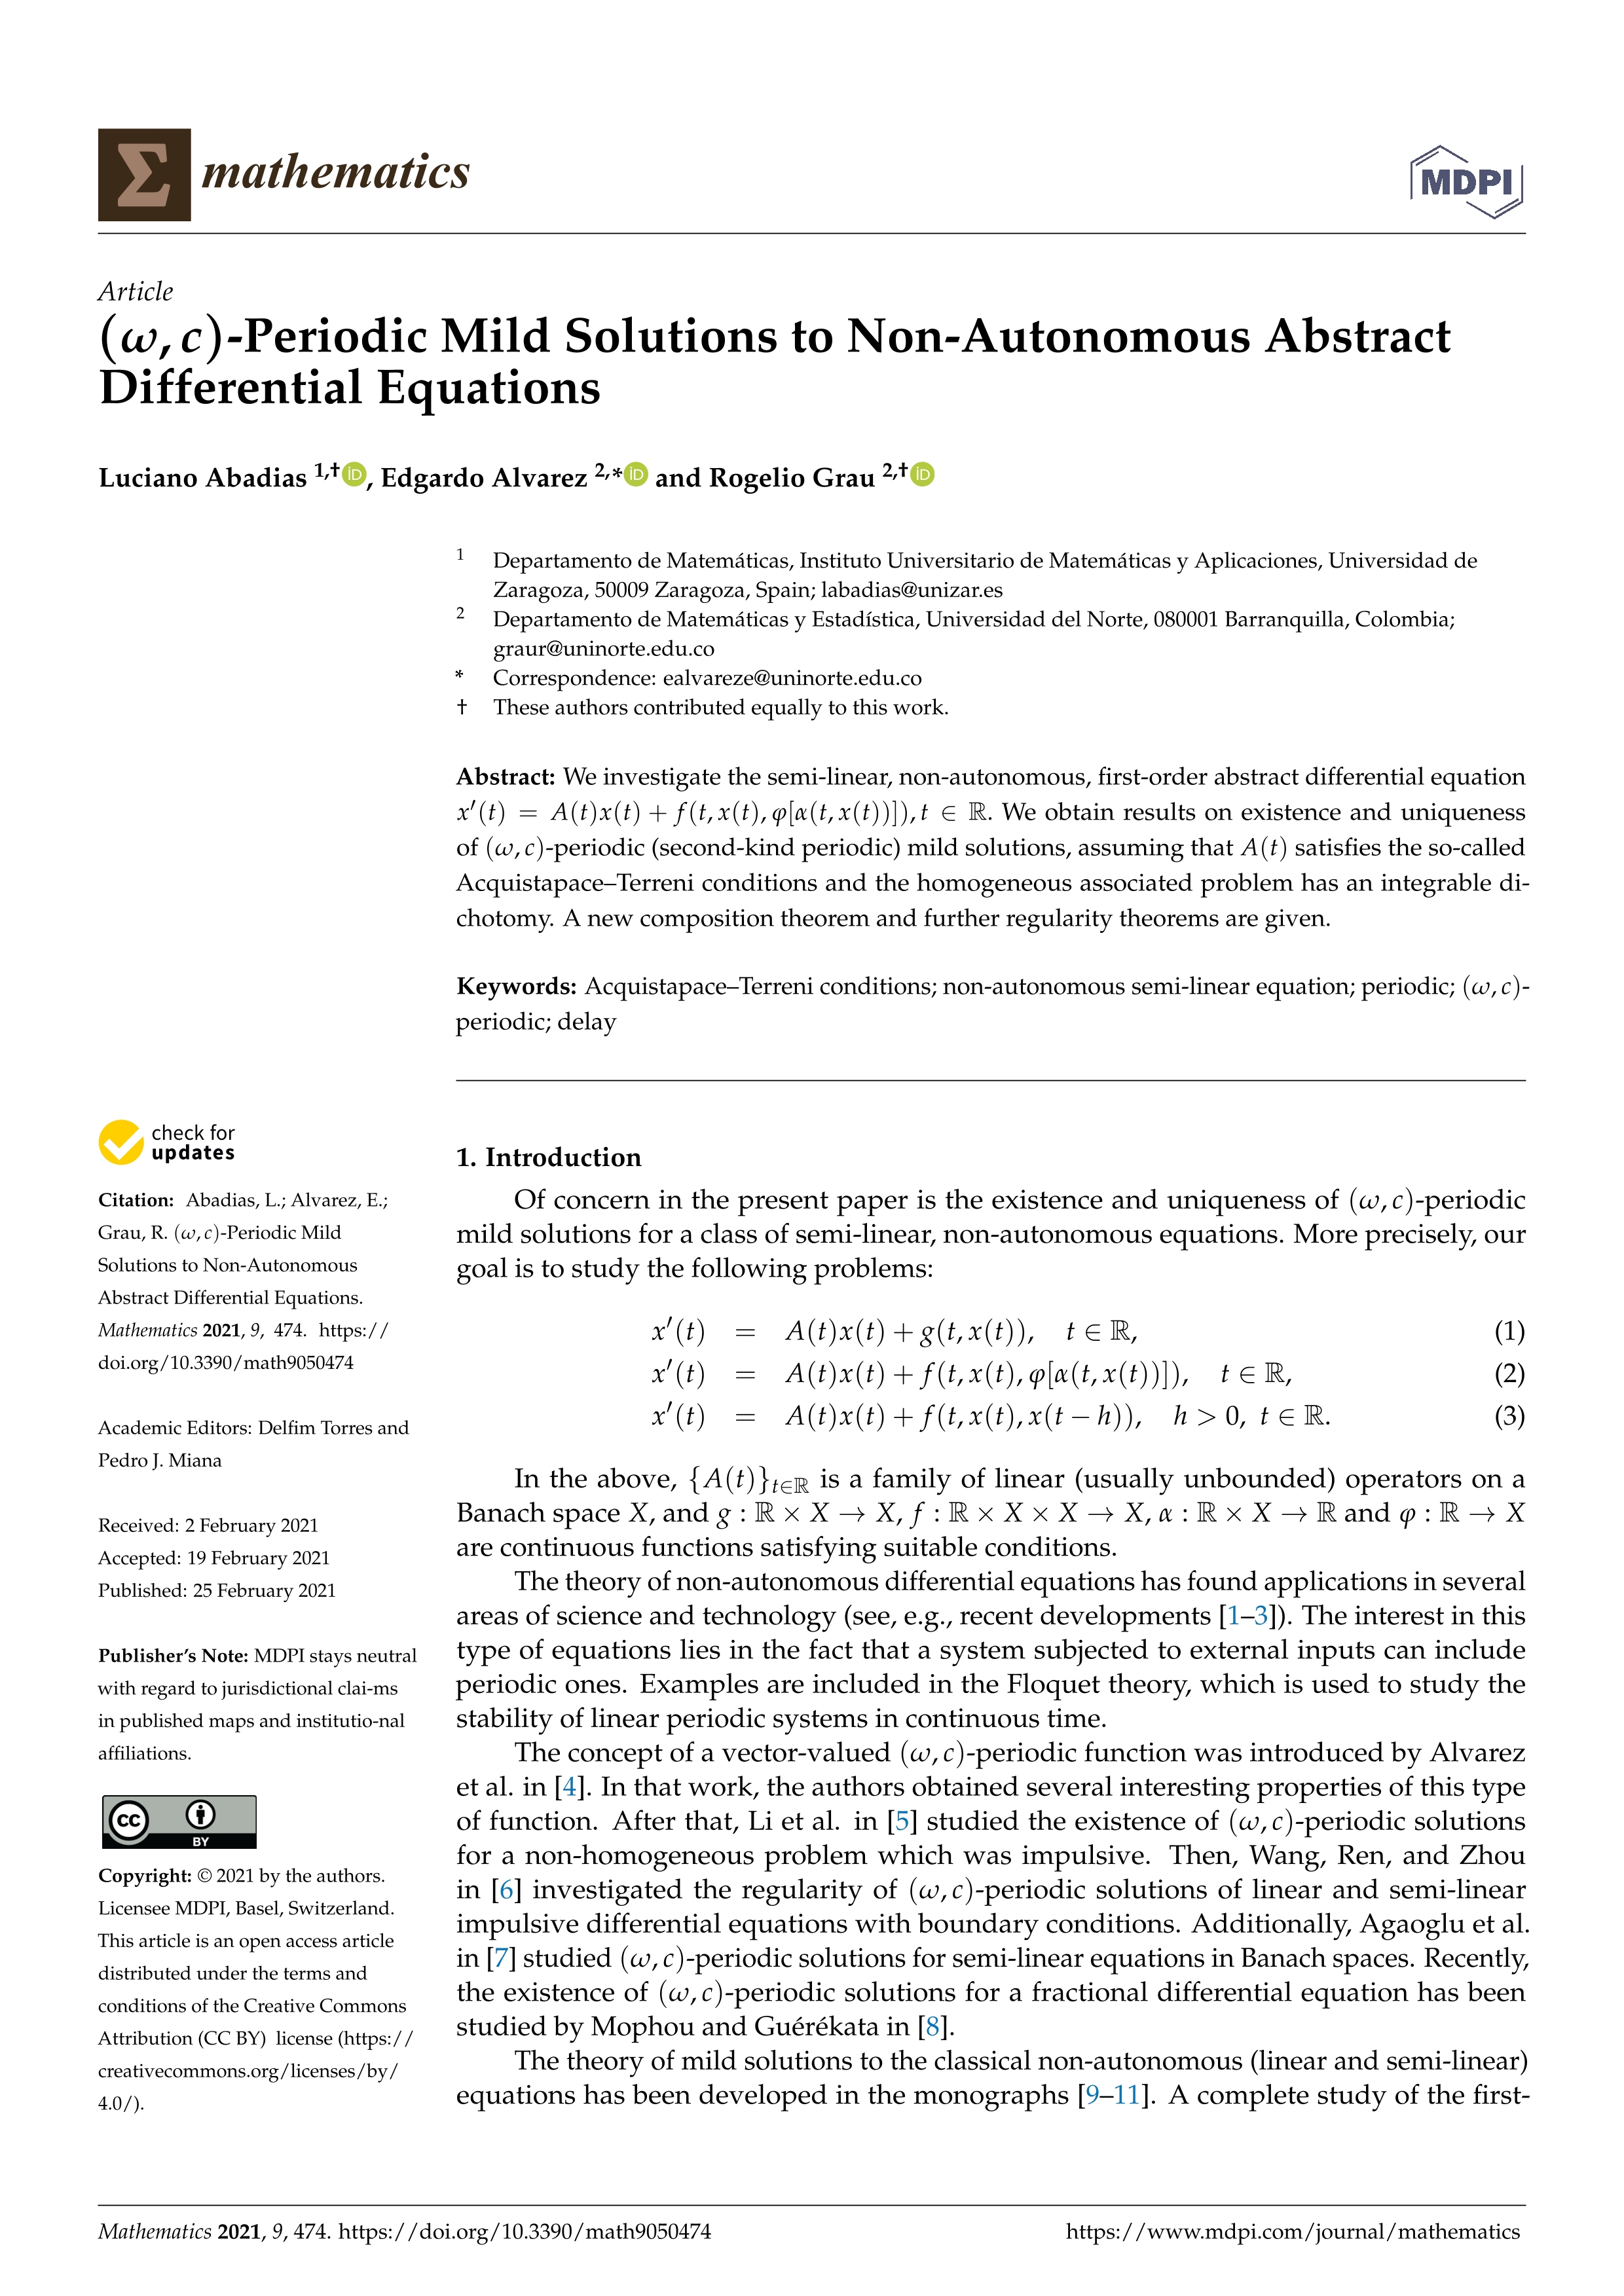 (w, c)-periodic mild solutions to non-autonomous abstract differential equations